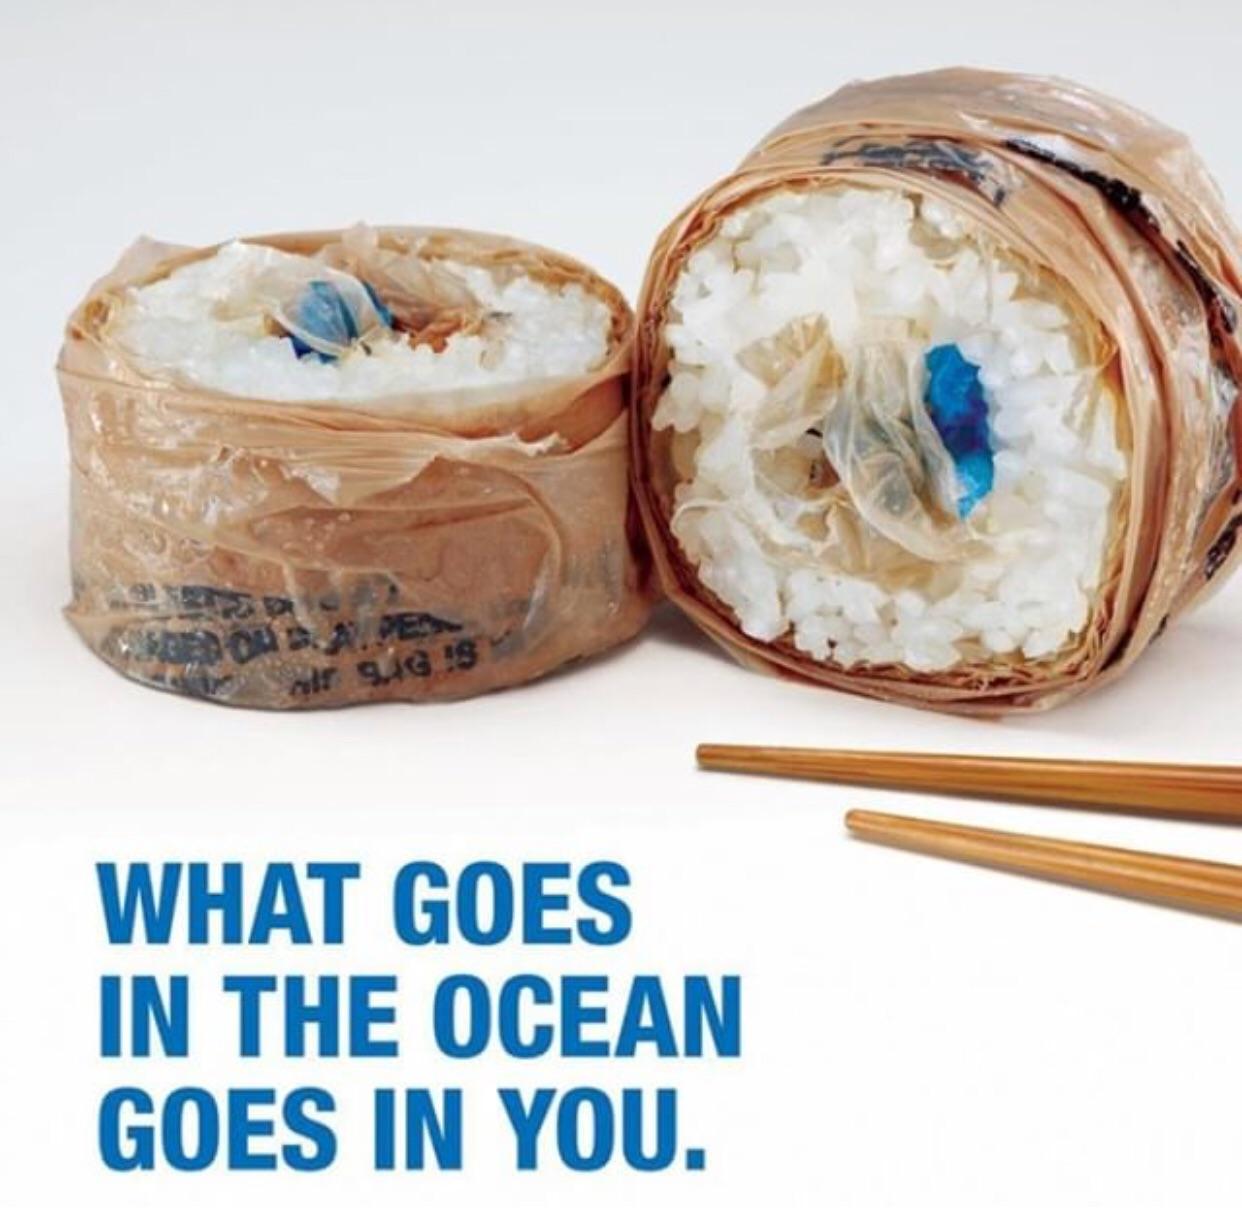 surfrider foundation sushi ad - What Goes In The Ocean Goes In You.